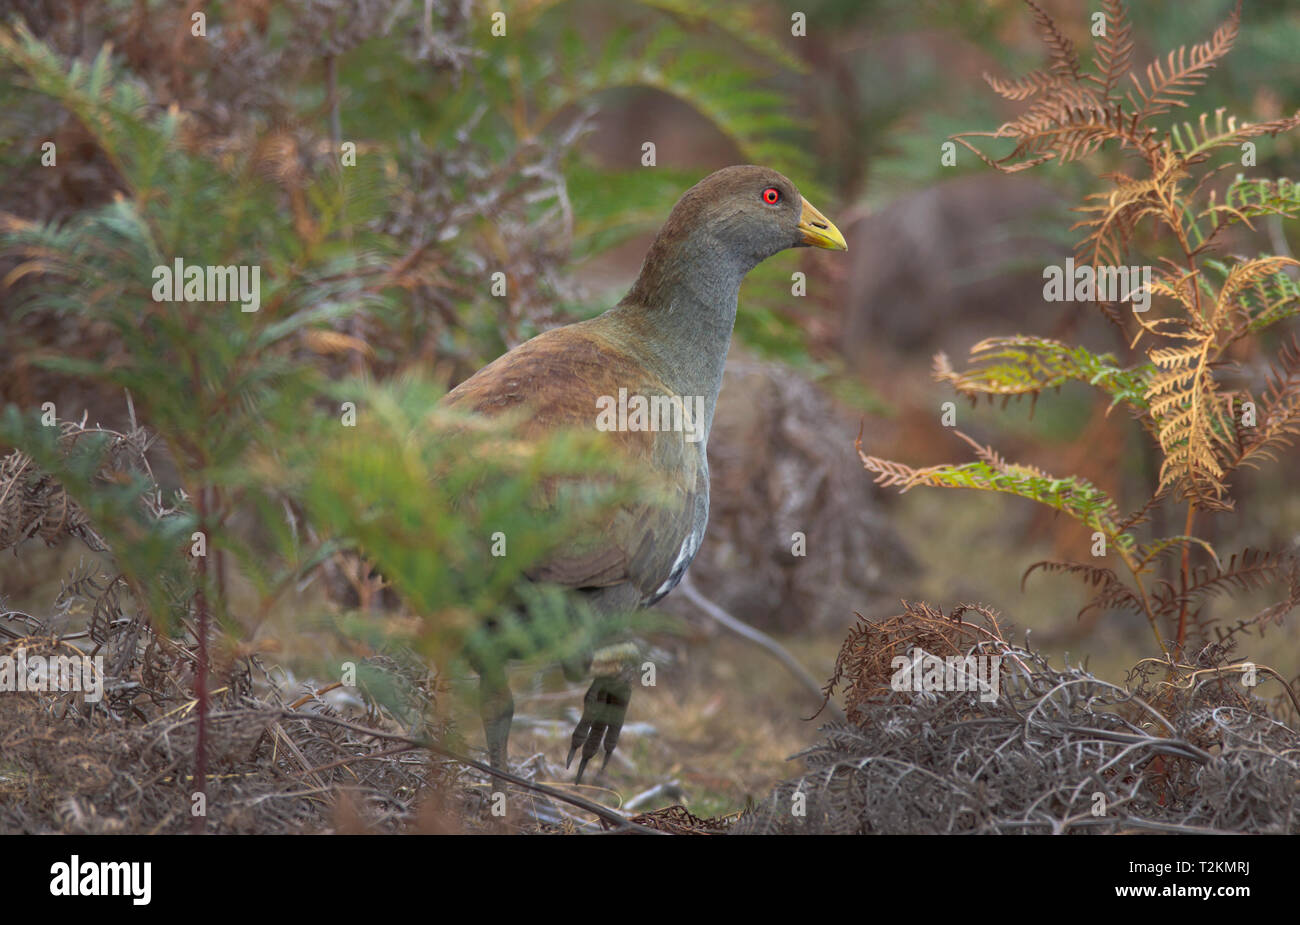 A Tasmanian Native-hen, Tribonyx mortierii, with its distinctive red eye and yellow beak searching for food  in the bush undergrowth in Tasmania. Stock Photo